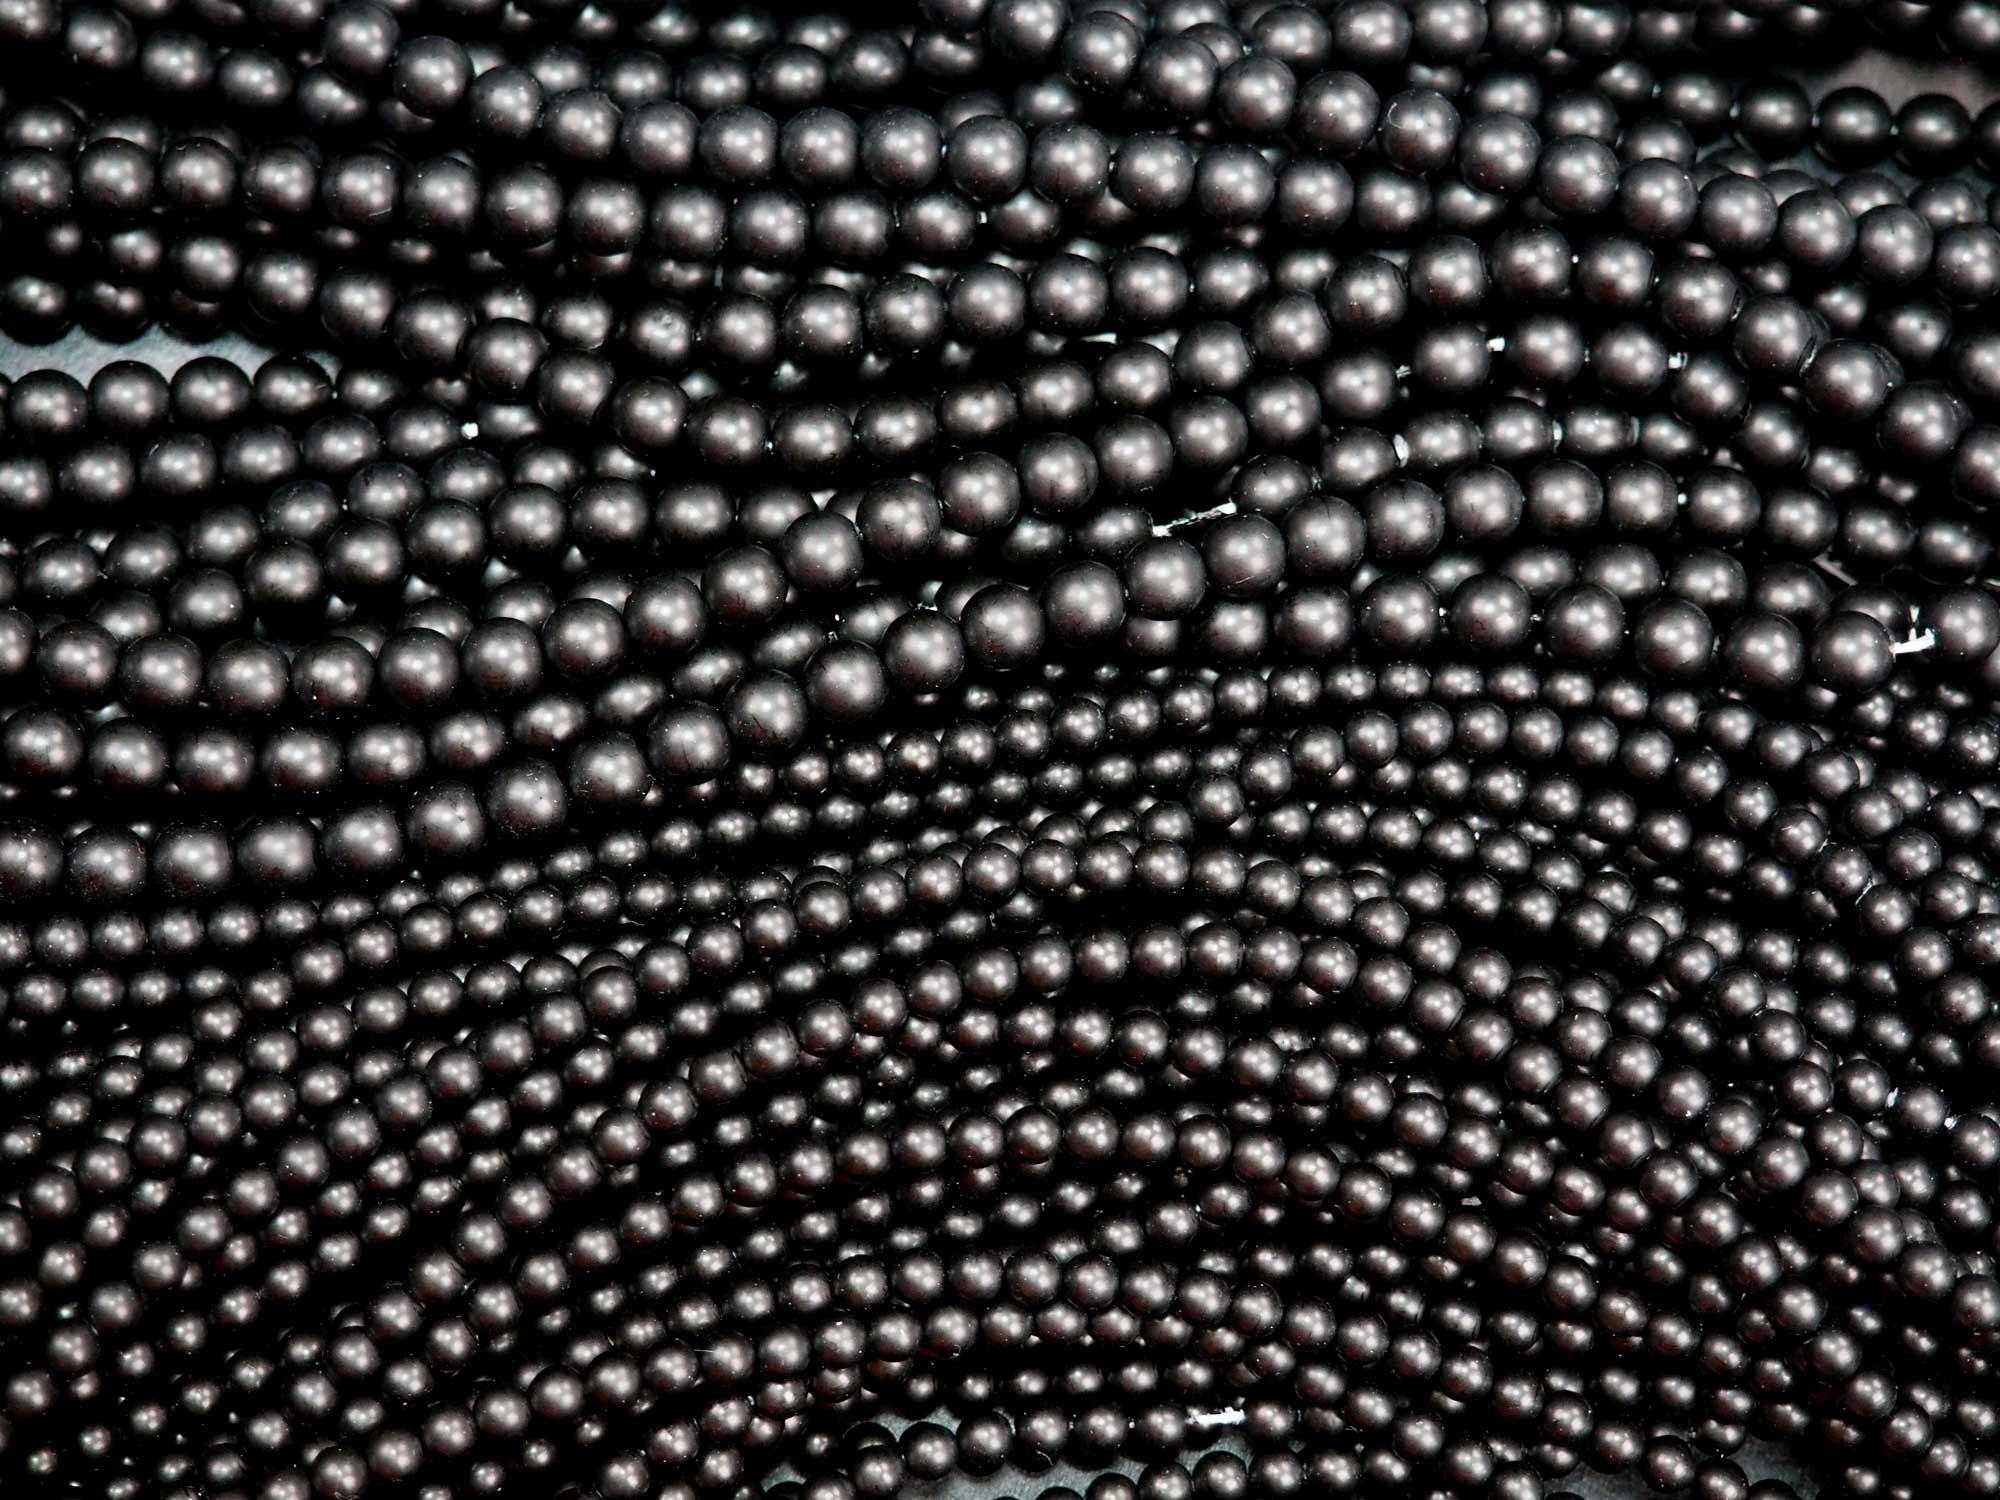 Czech Round Glass Imitation Pearls Matted Black Pearl color jet black mat 6mm